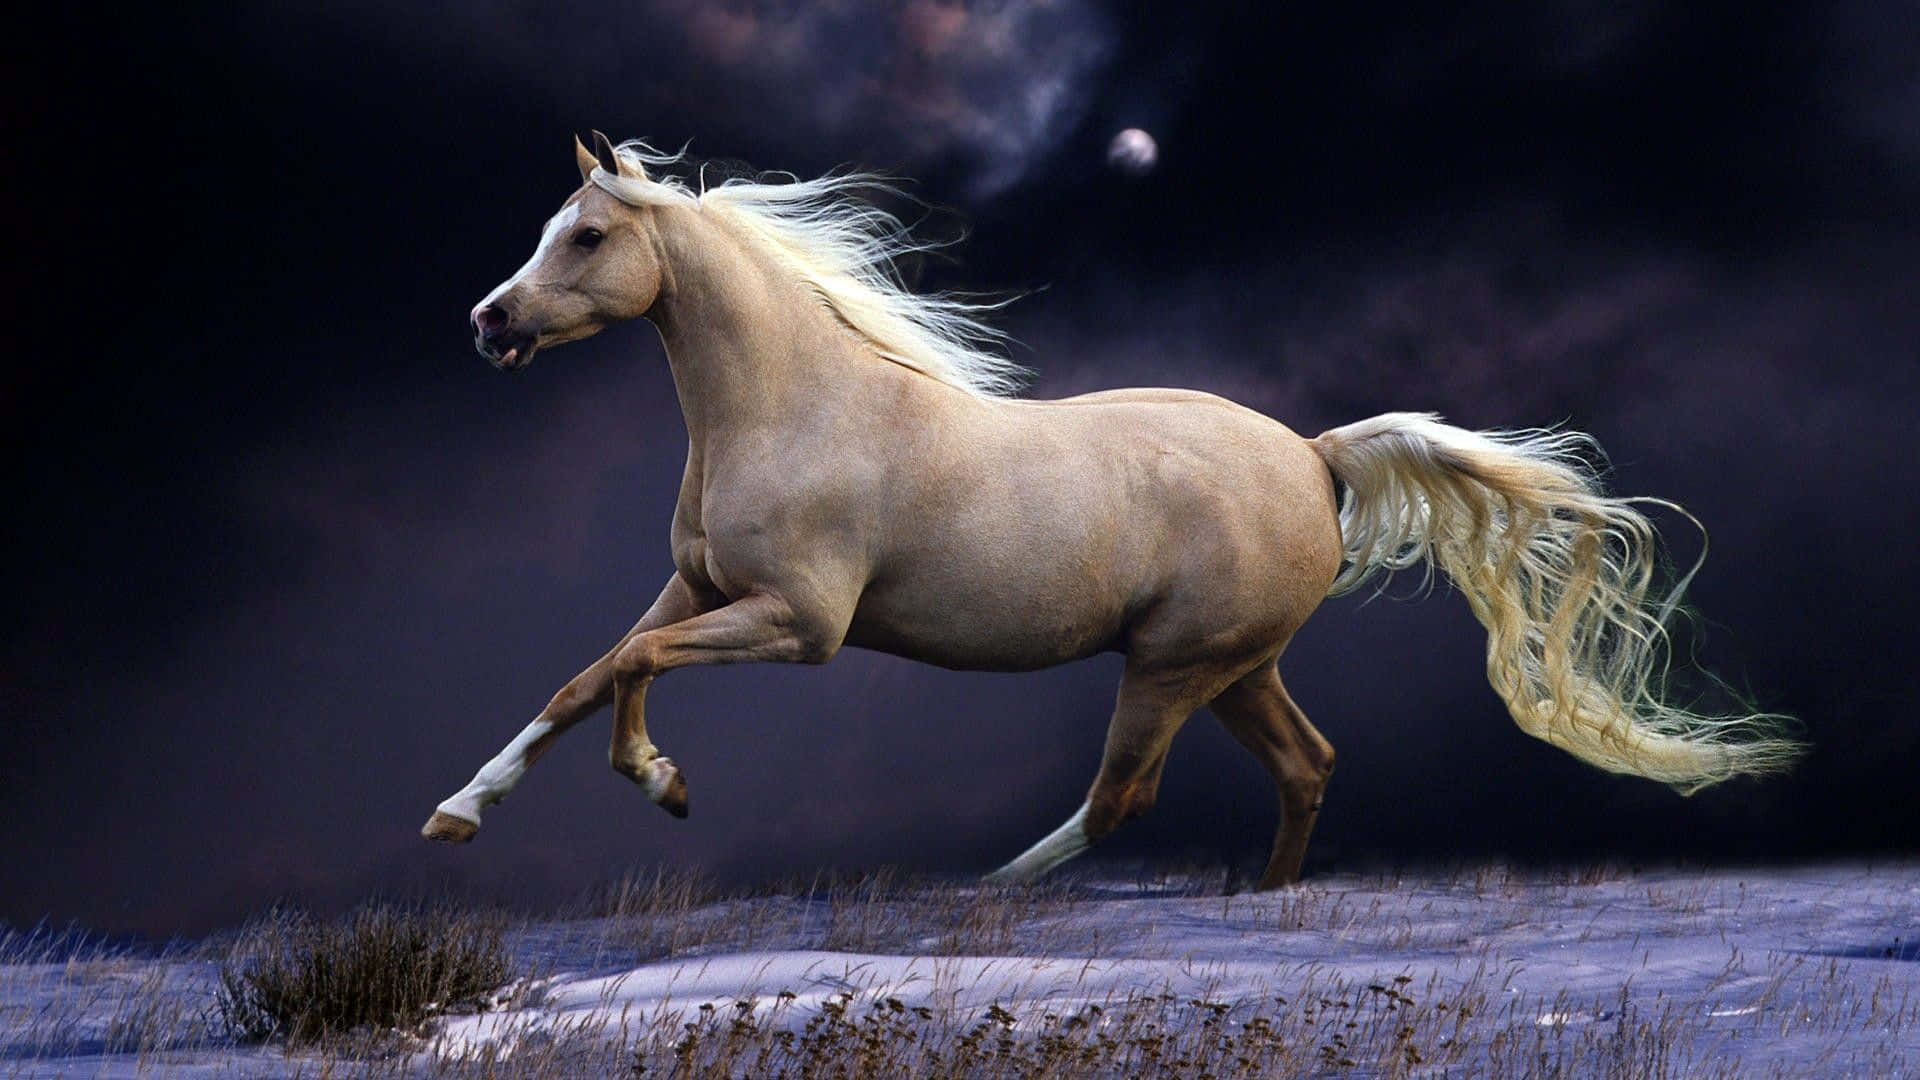 Majestic Beauty Of A Galloping Horse